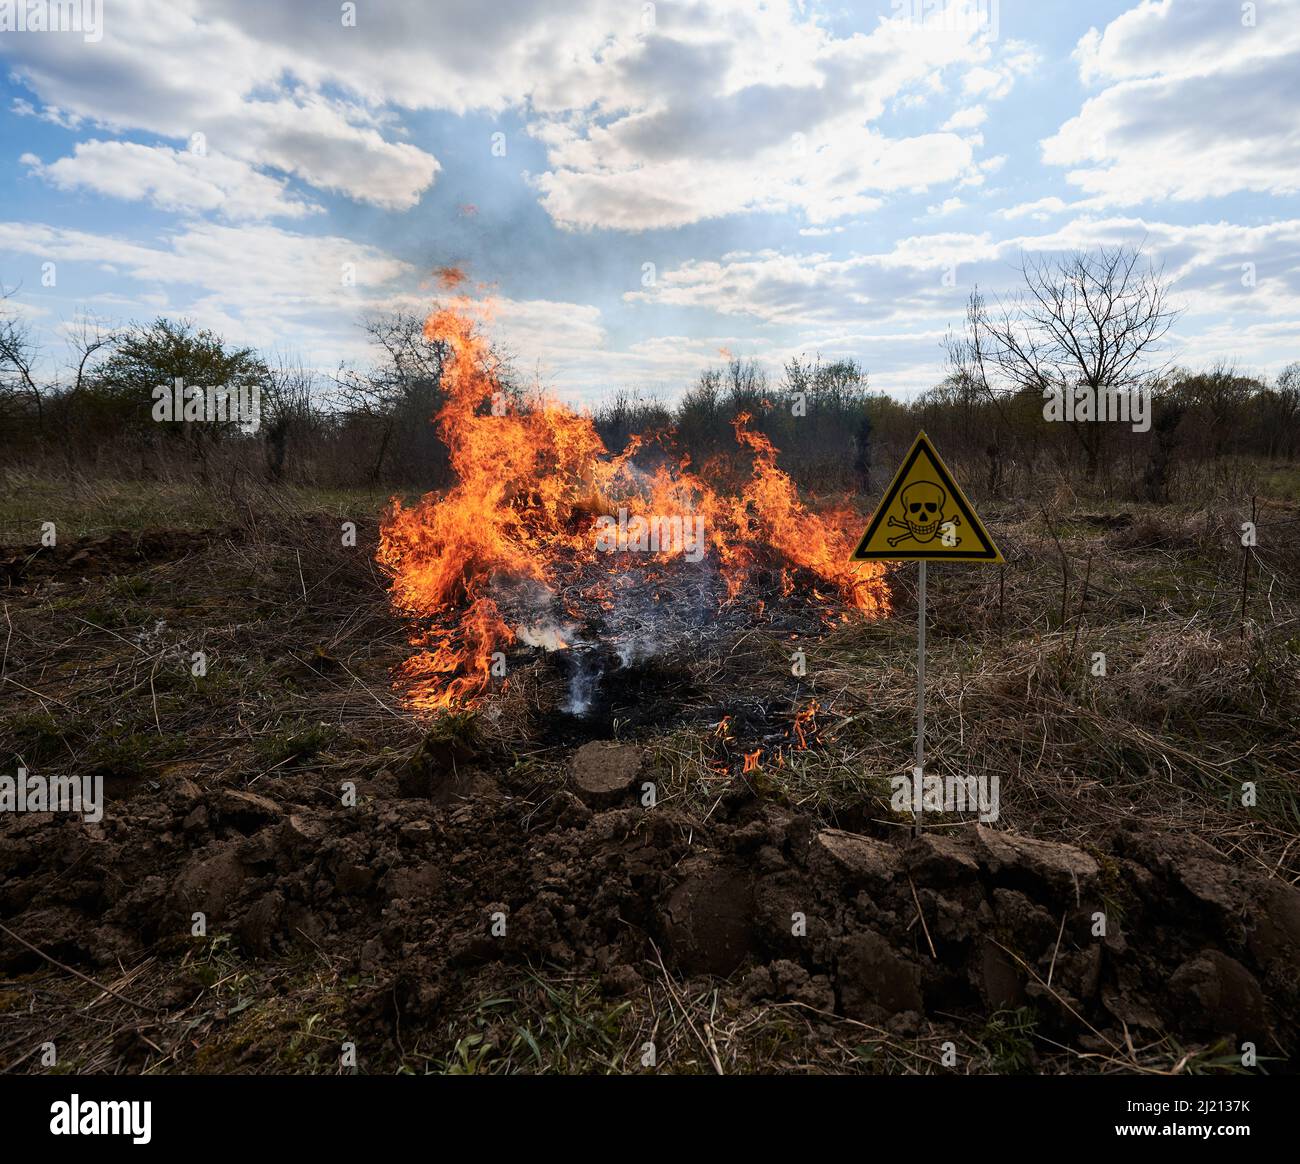 Burning dry grass and poison toxic sign under cloudy sky. Yellow triangle with skull and crossbones sign warning about danger in field with fire. Ecology, hazard and natural disaster concept. Stock Photo